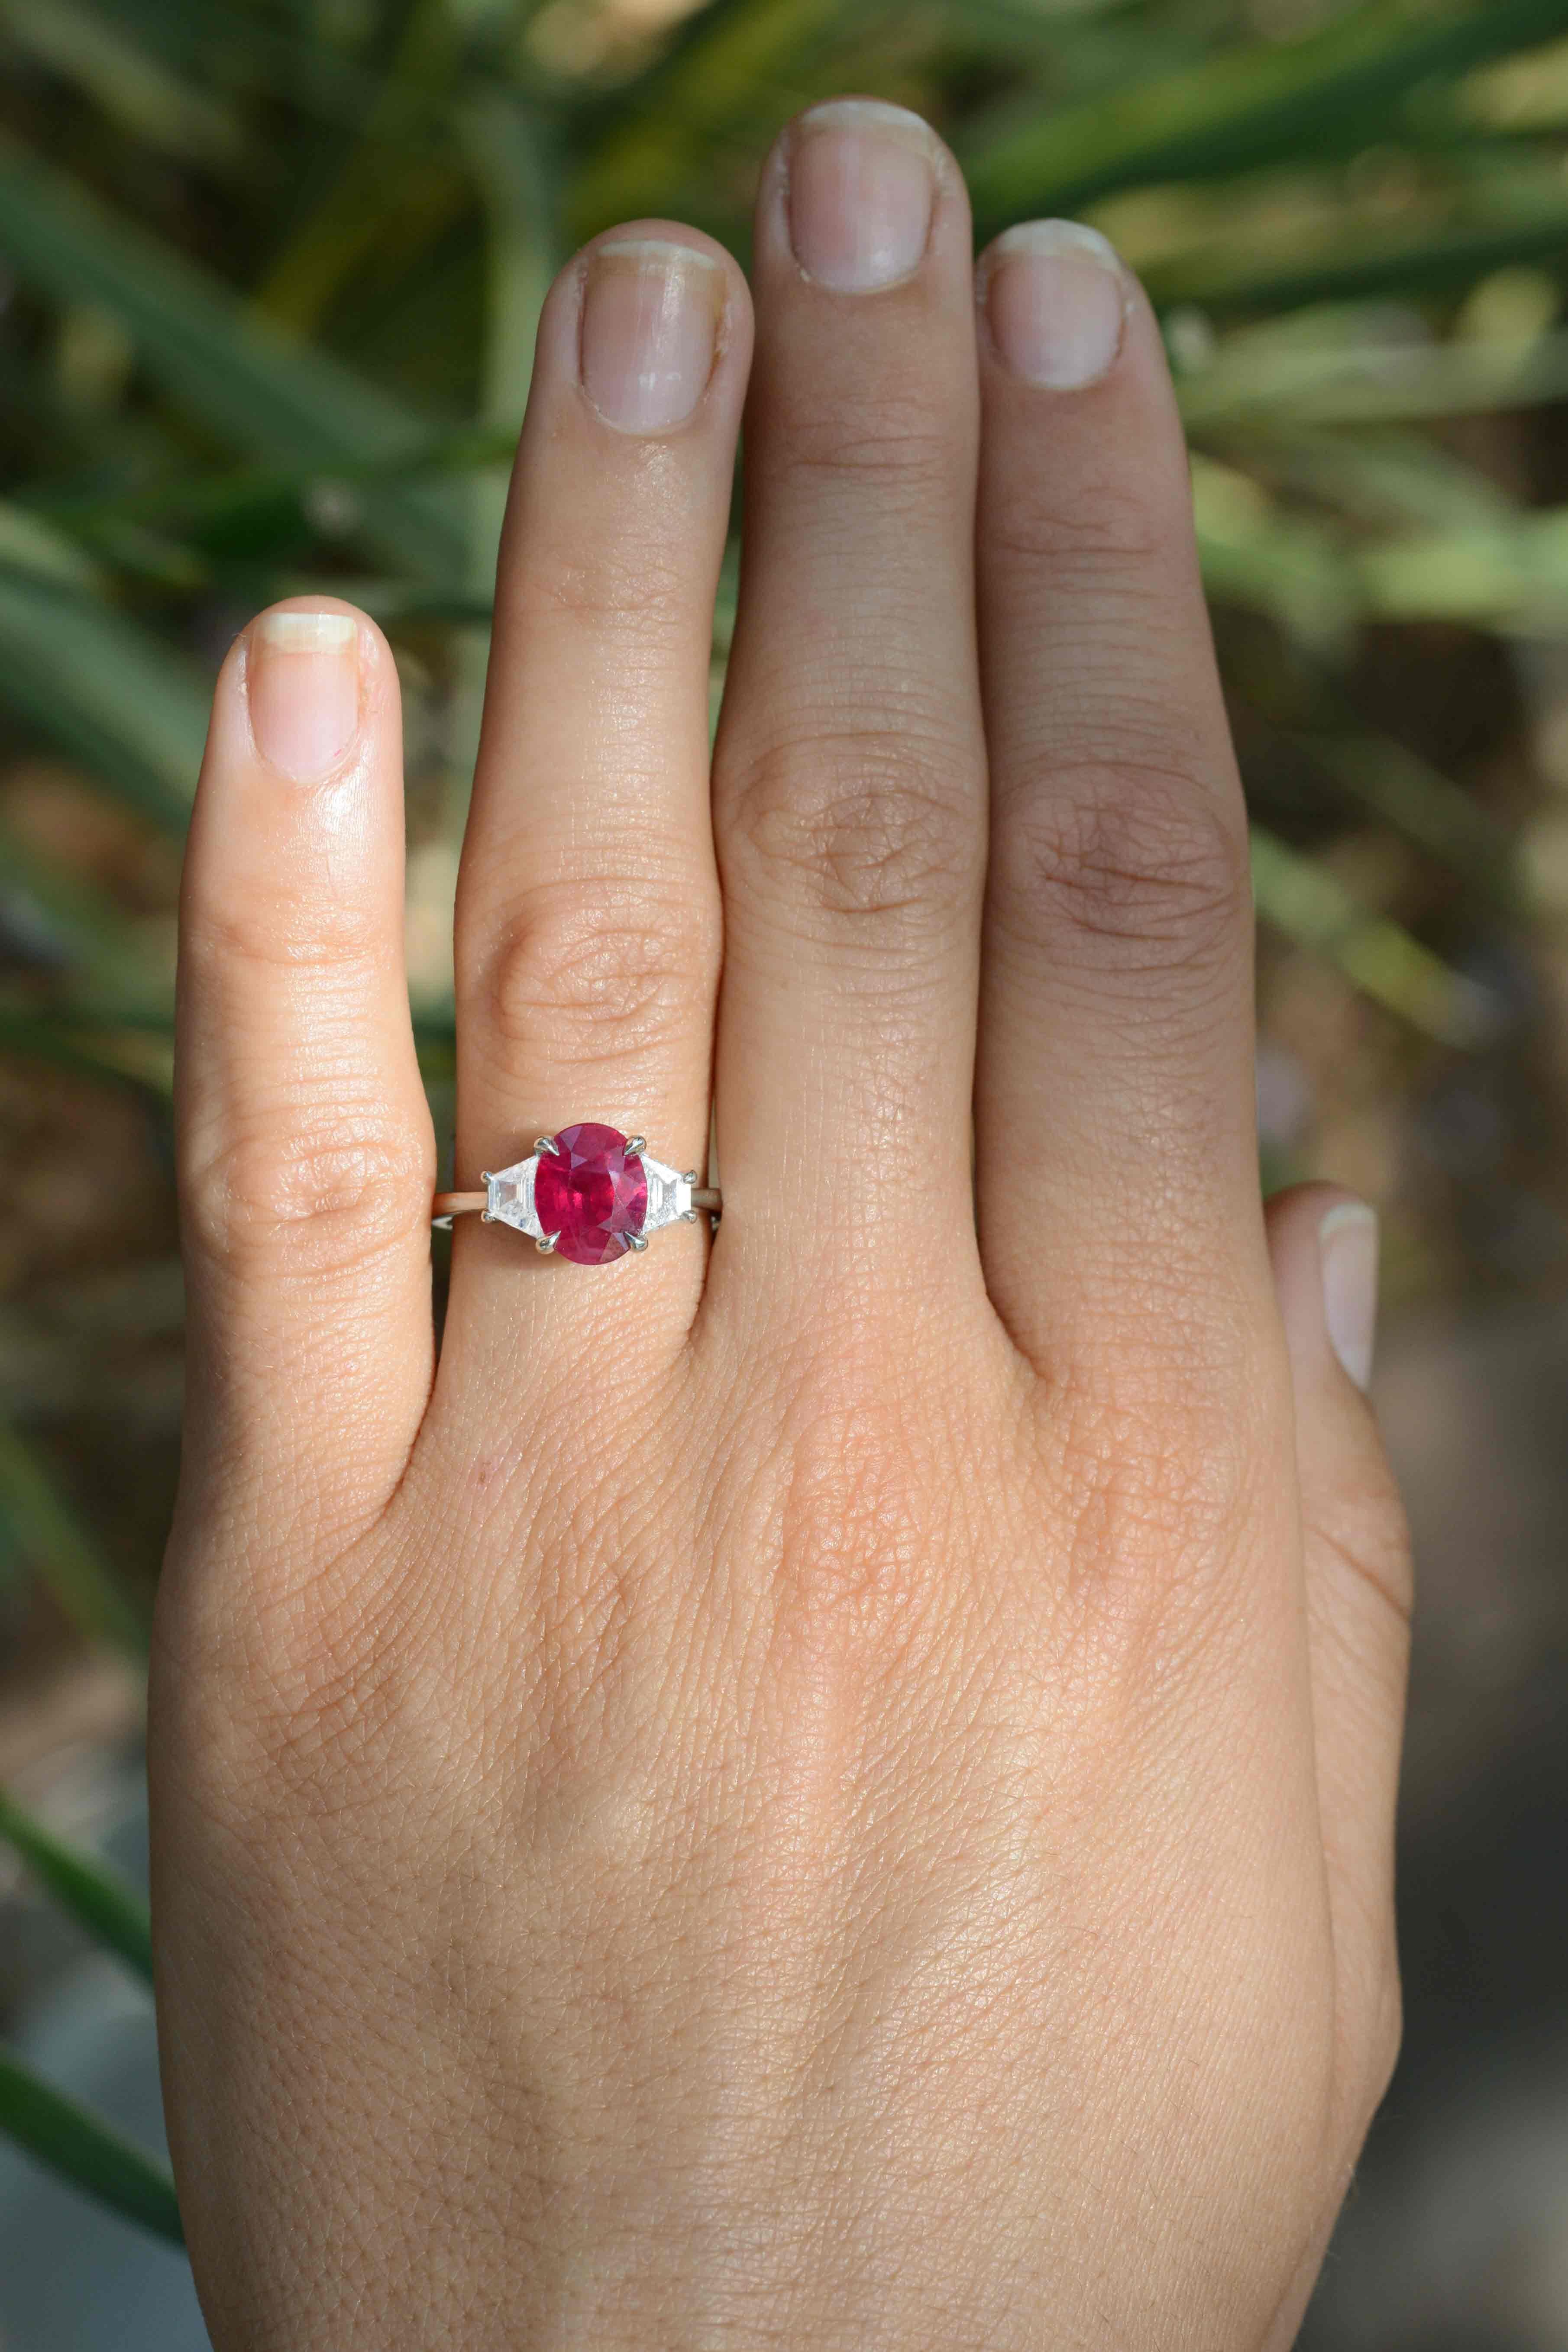 The Beaumont natural ruby engagement ring is centered by a vivid, pigeon blood red oval ruby certified by the Gemological Institute of America. A classic, 3 stone platinum mount featuring elegant claw prongs is accented by a pair of dazzling